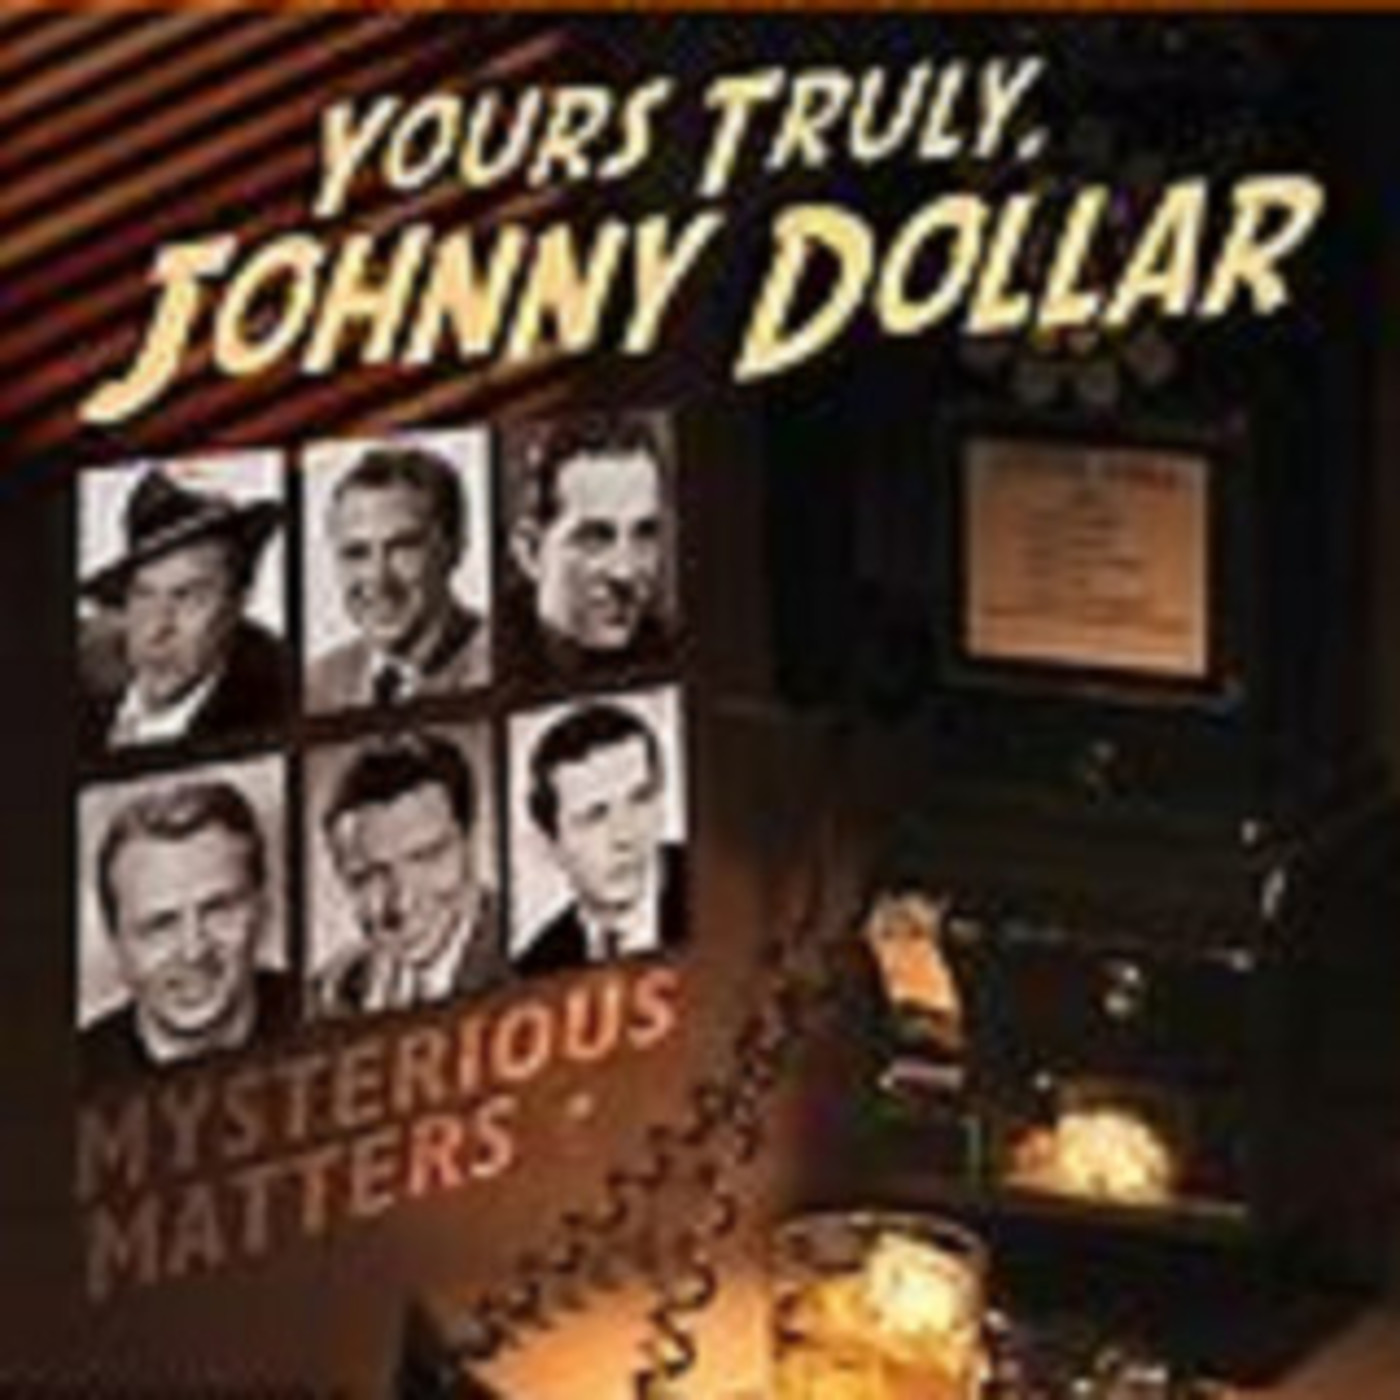 Yours Truly, Johnny Dollar - 073160, episode 699 - The Rhymer Collection Matter (AFRS)